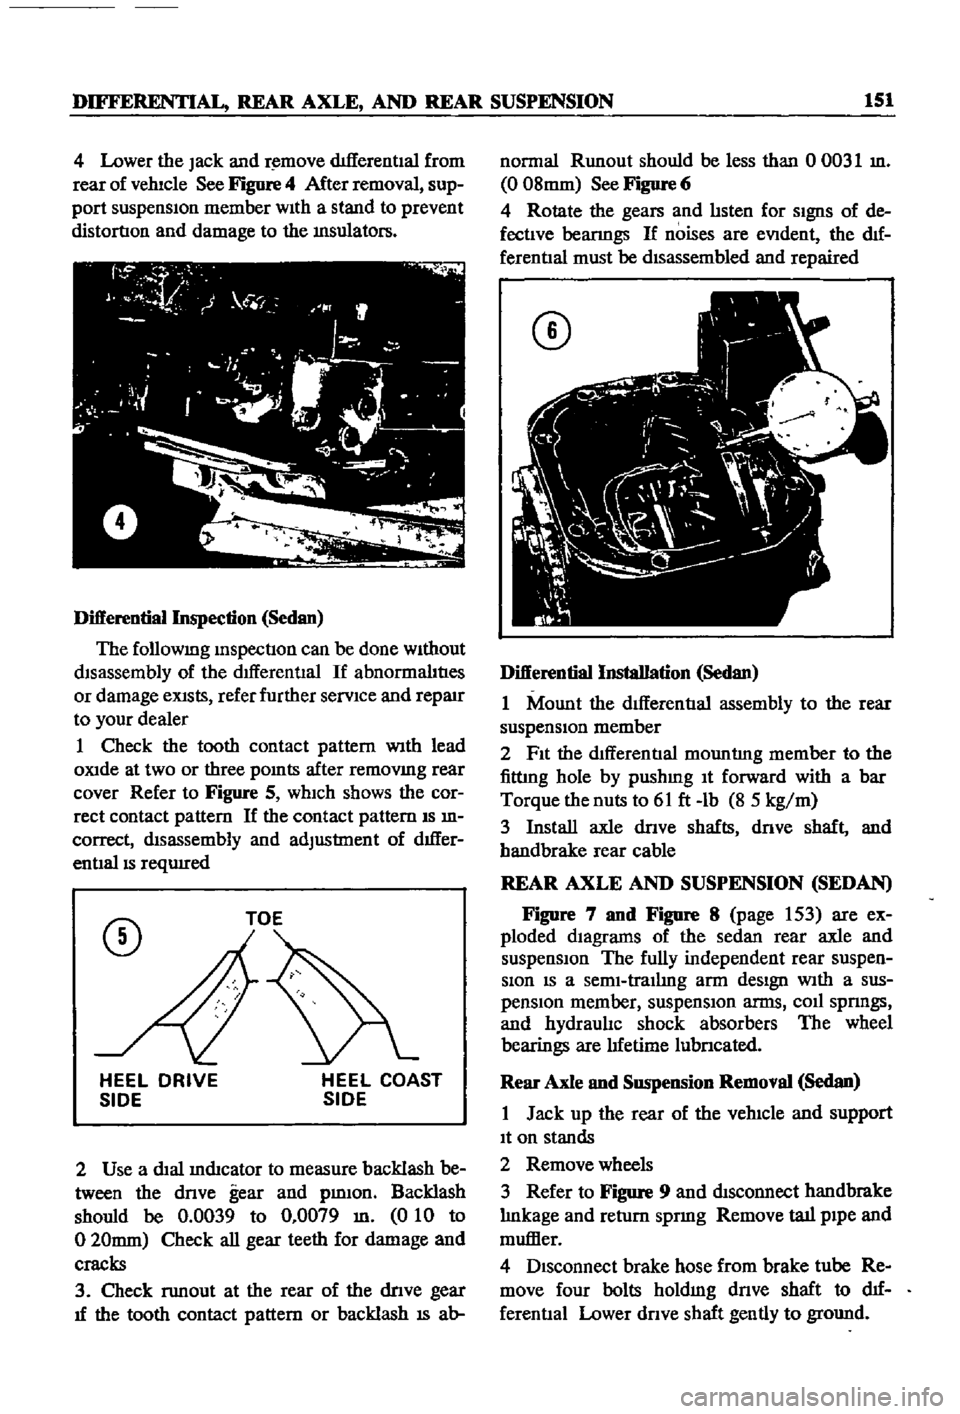 DATSUN 510 1968  Service Repair Manual 
DIFFERENTIAL 
REAR 
AXLE 
AND 
REAR 
SUSPENSION 
151

4 
Lower 
the

Jack 
and

r 
move 
dIfferentIal 
from

rear 
of 
vehIcle 
See

Figure 
4 
After 
removal

sup

port 
suspensIon 
member 
wIth

a 